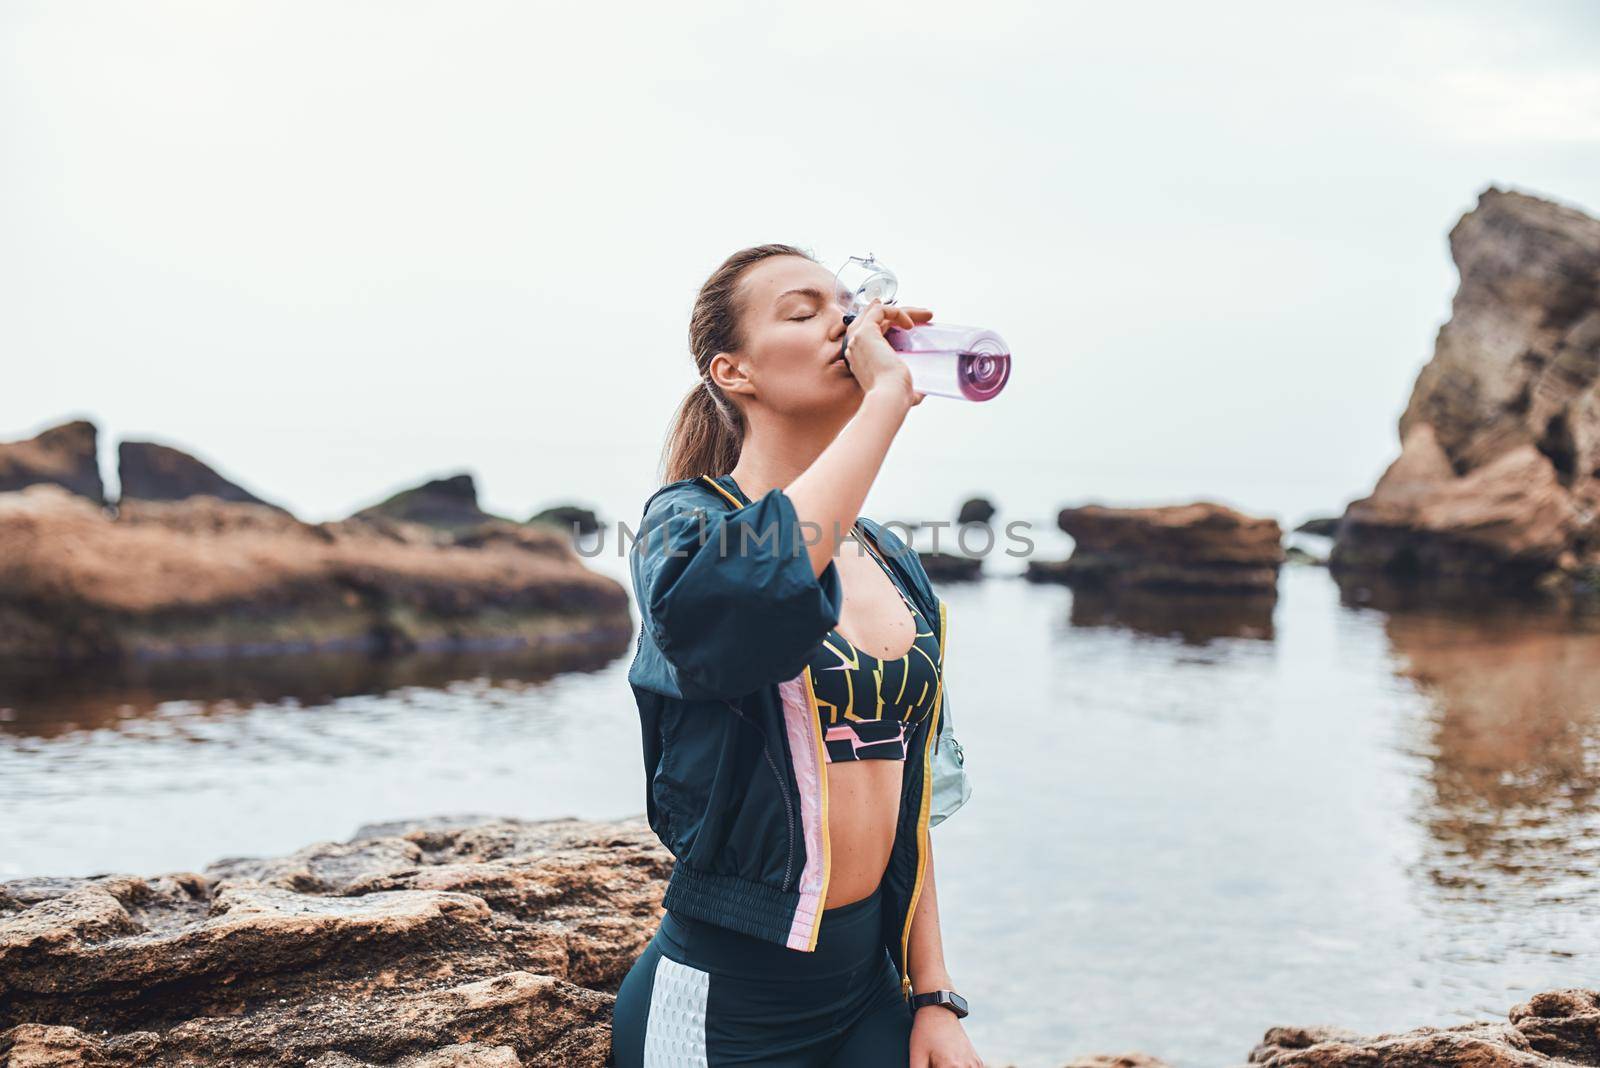 Water is life. Sporty young woman in sportswear drinking water while sitting on the stone at the beach. Motivation. Sport concept. Taking a break